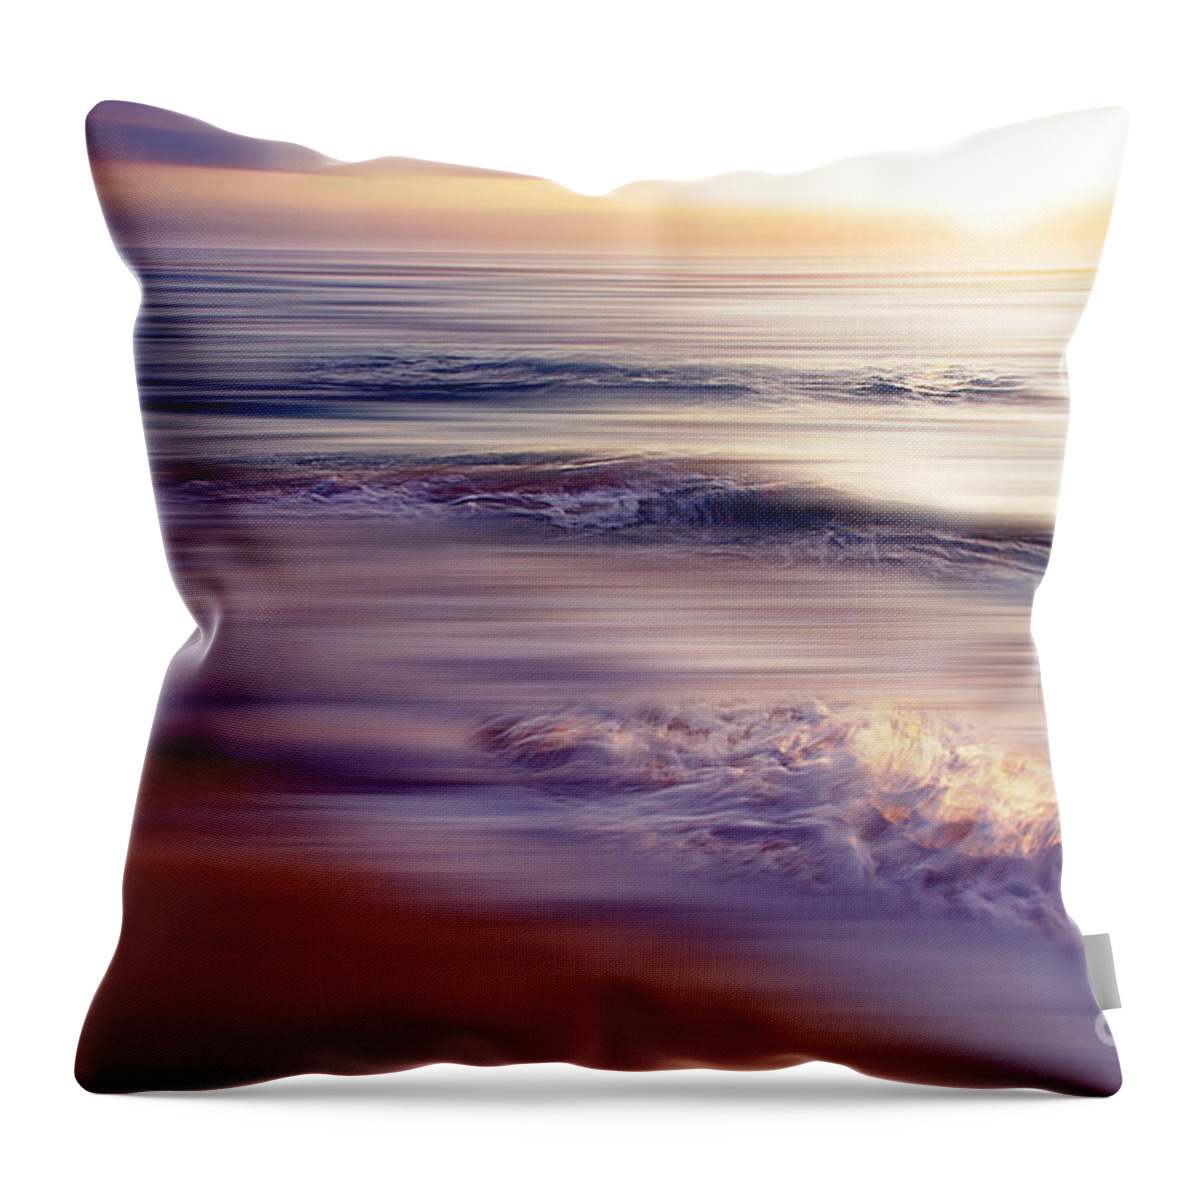 Sea Throw Pillow featuring the photograph Violet Dream by Hannes Cmarits